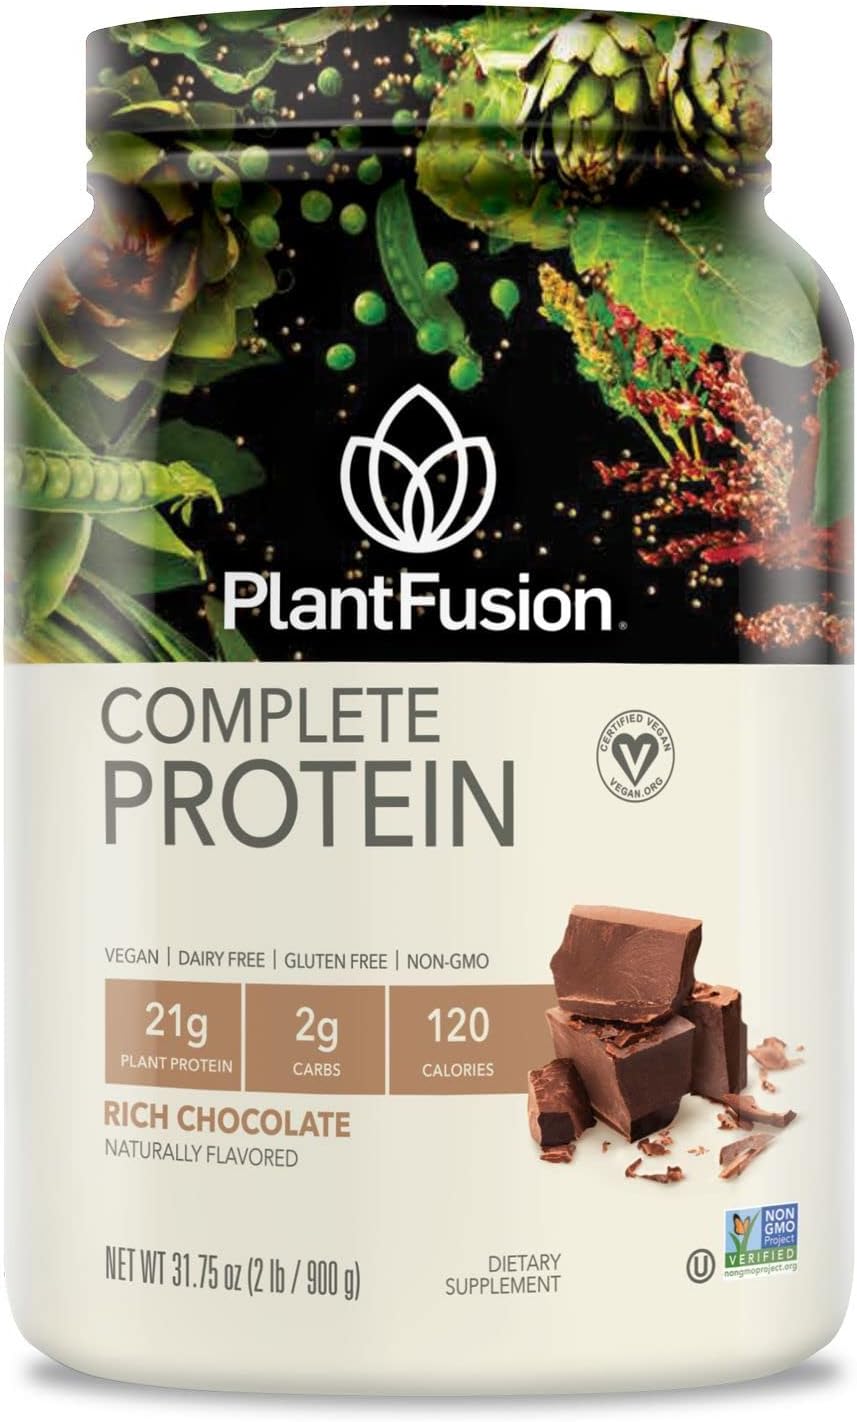 PlantFusion Complete Vegan Protein Powder - Plant Based With BCAAs, Di